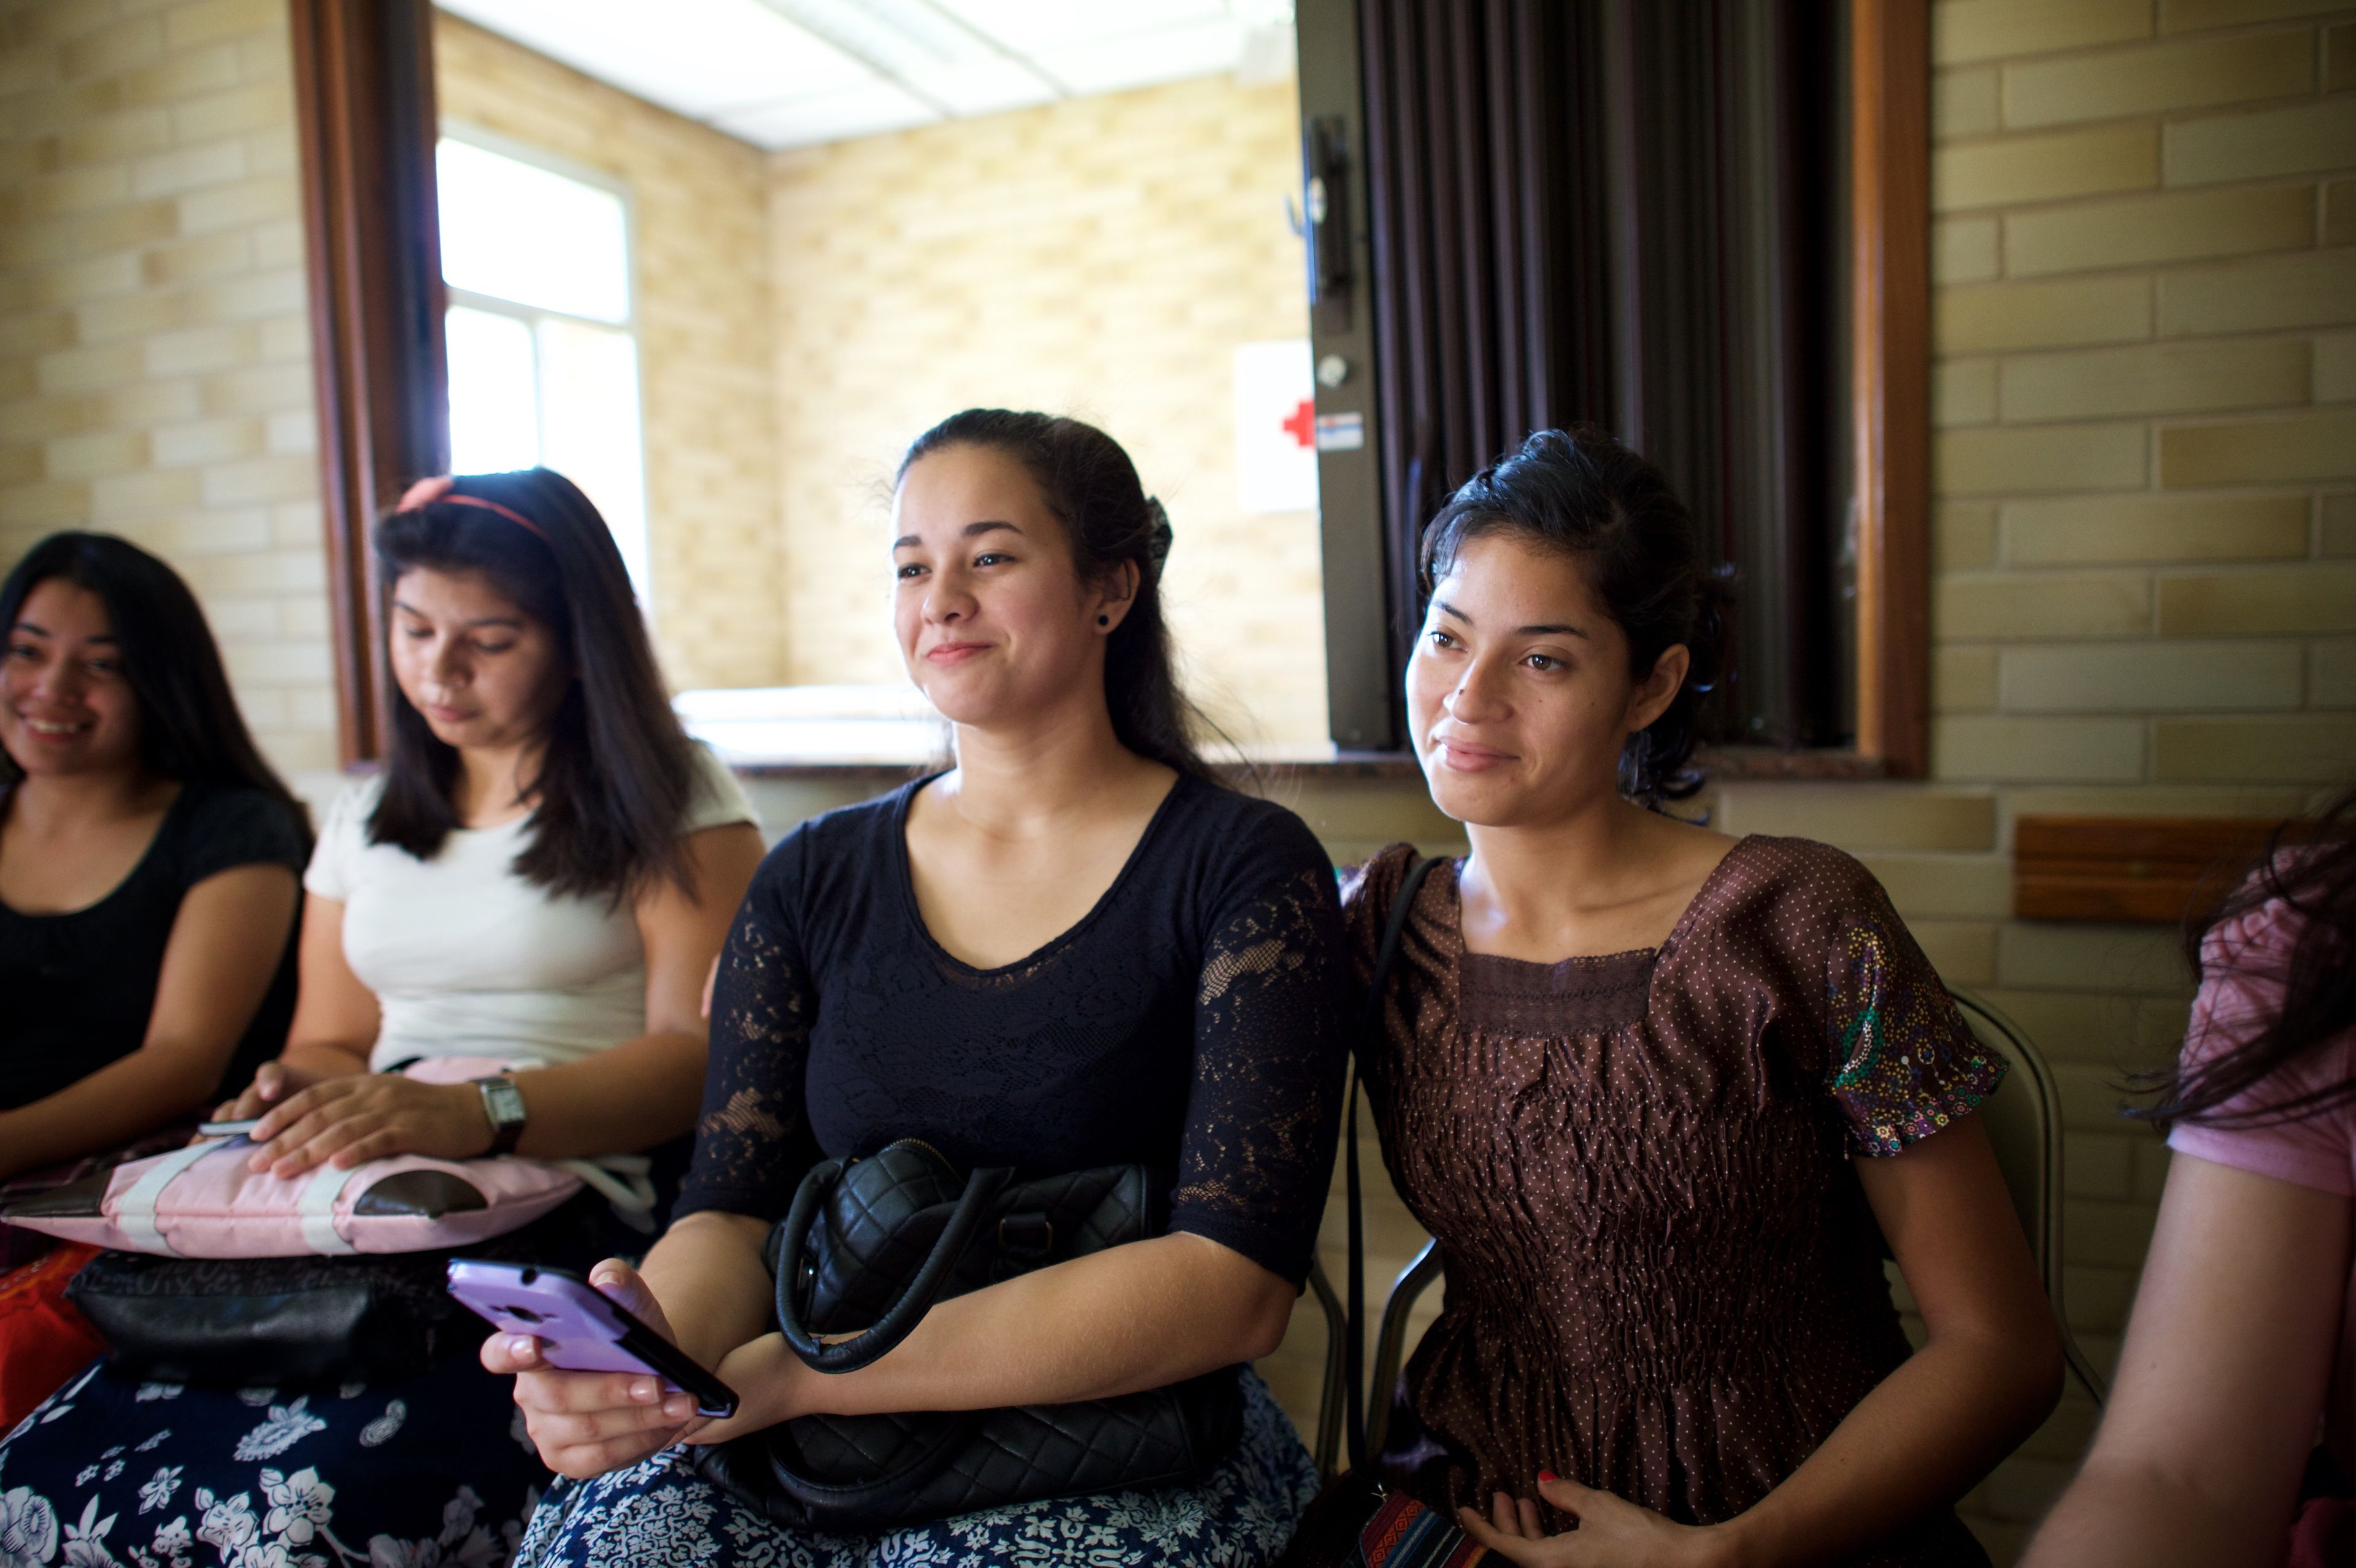 Women meet together in church in Paraguay.